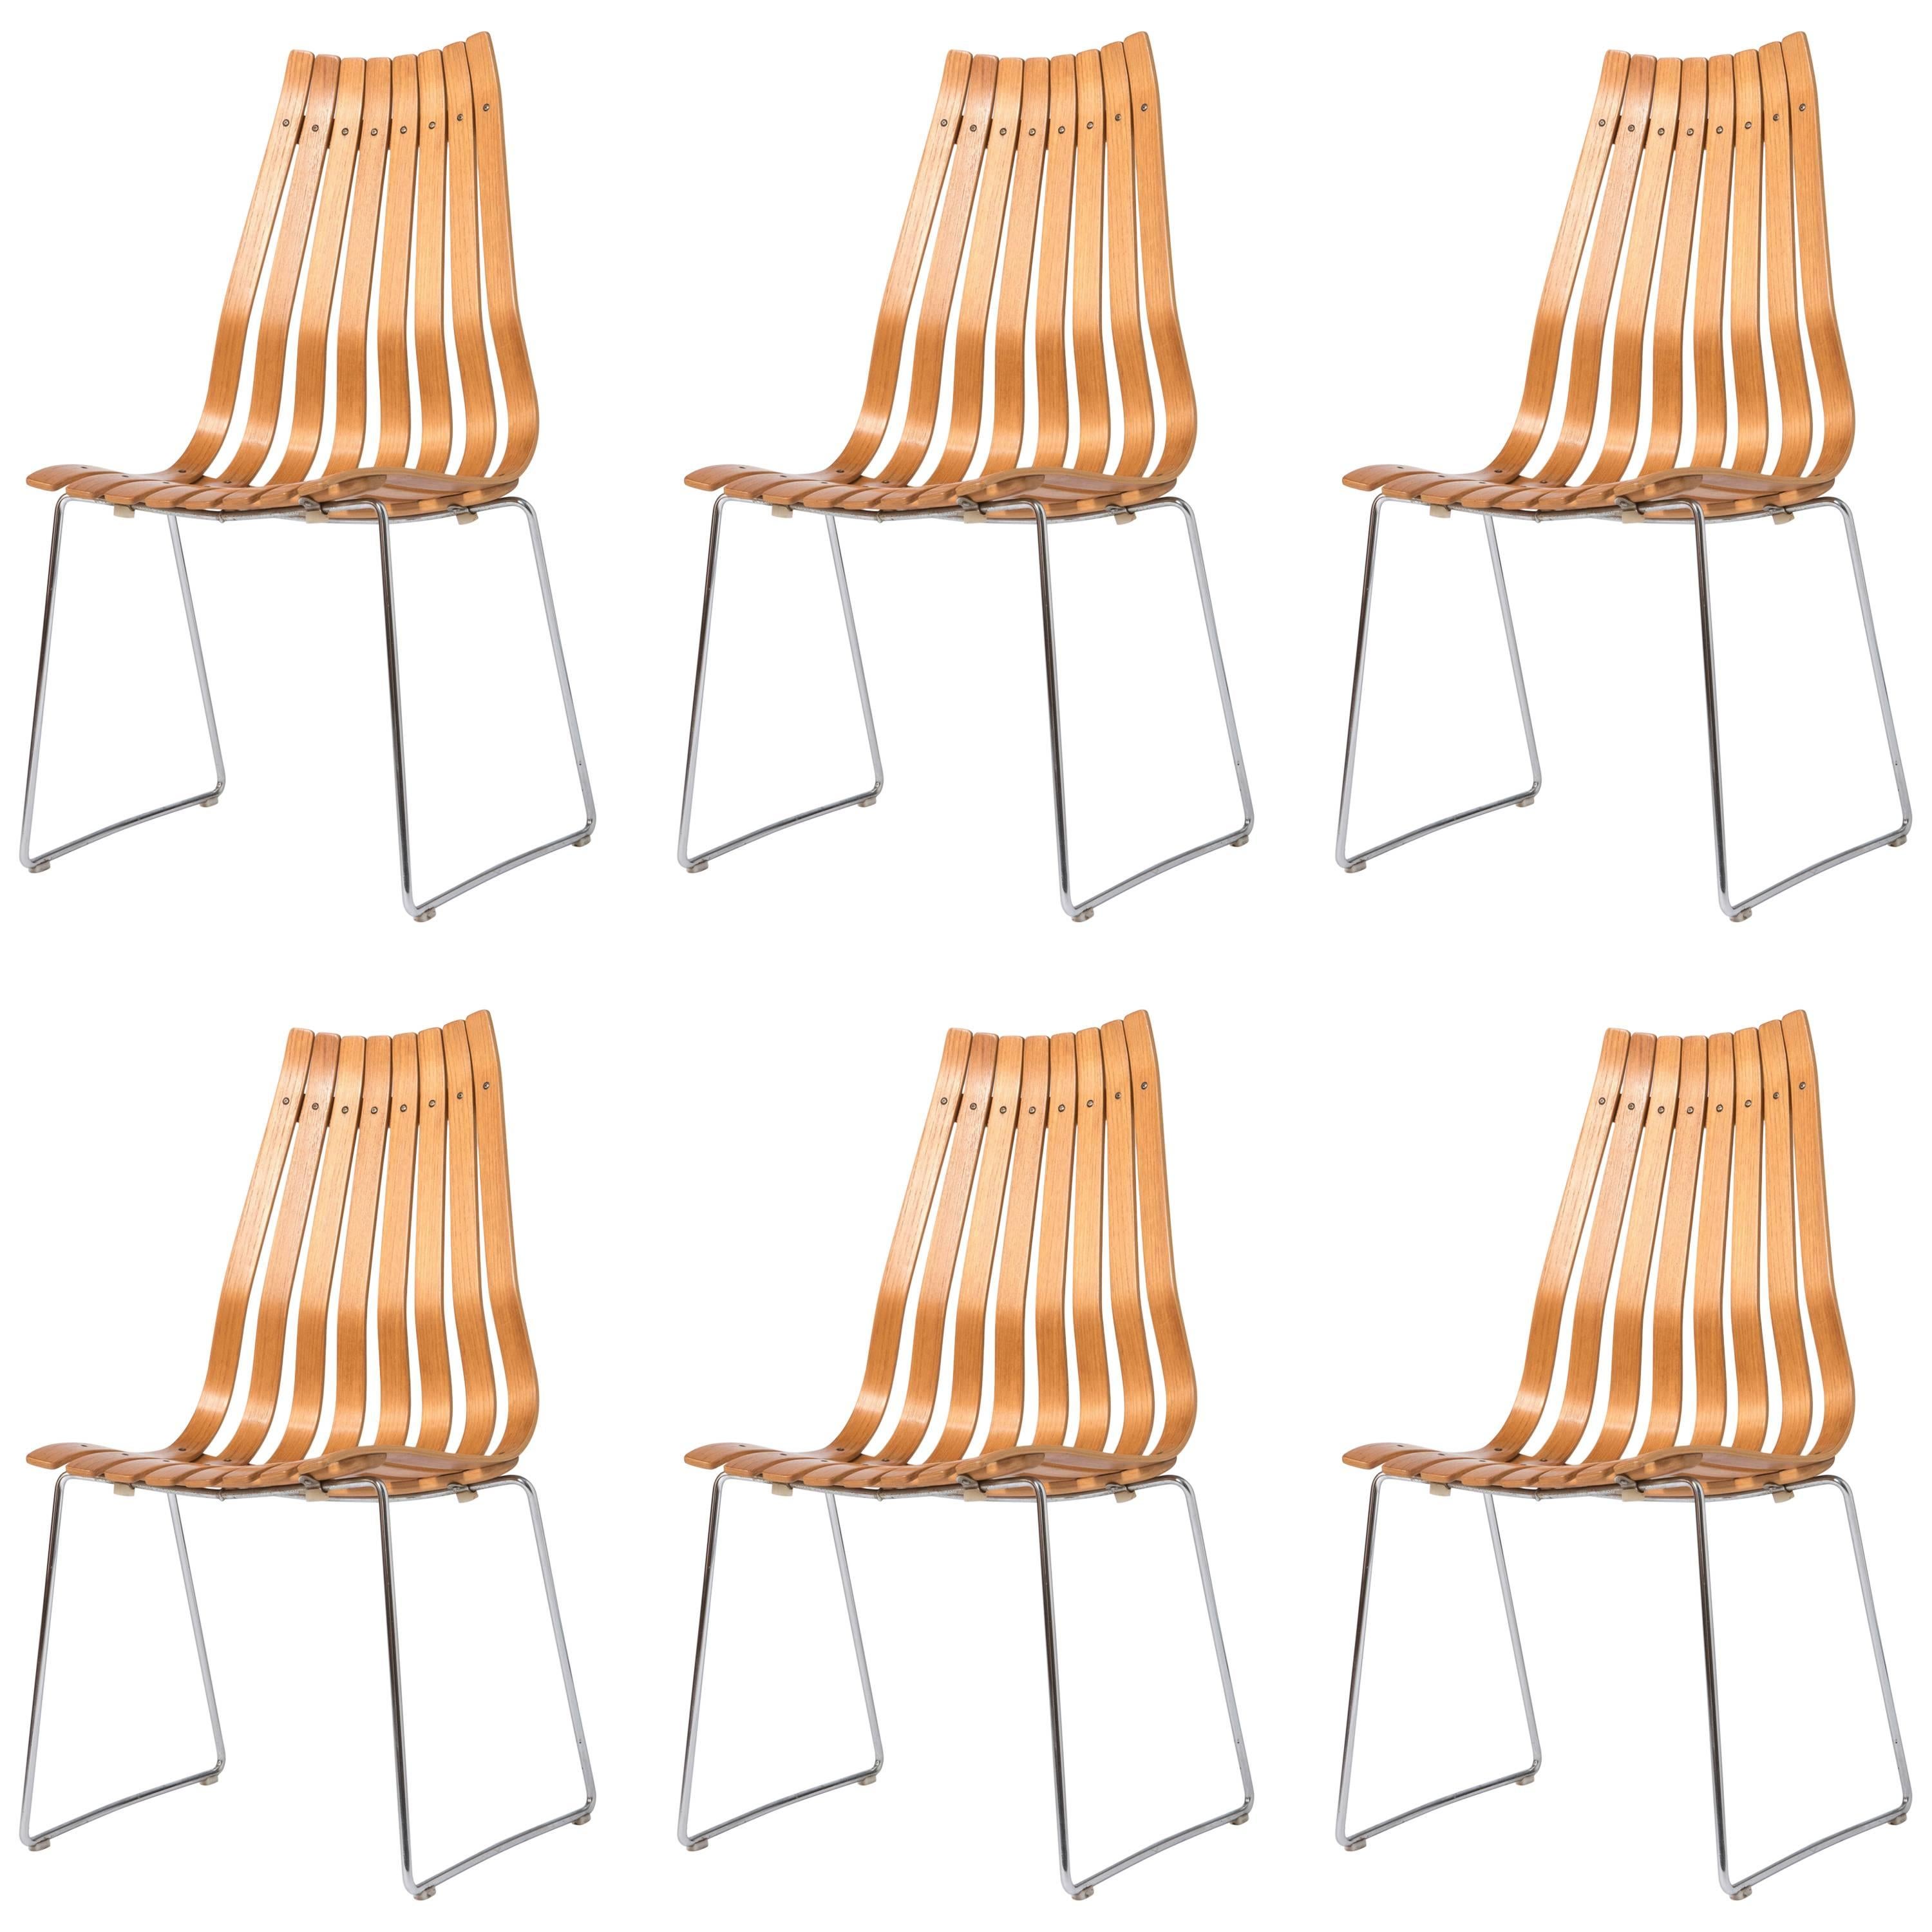 Hans Brattrud set of six Teak wood and chrome chairs, Norway circa 1957 For Sale